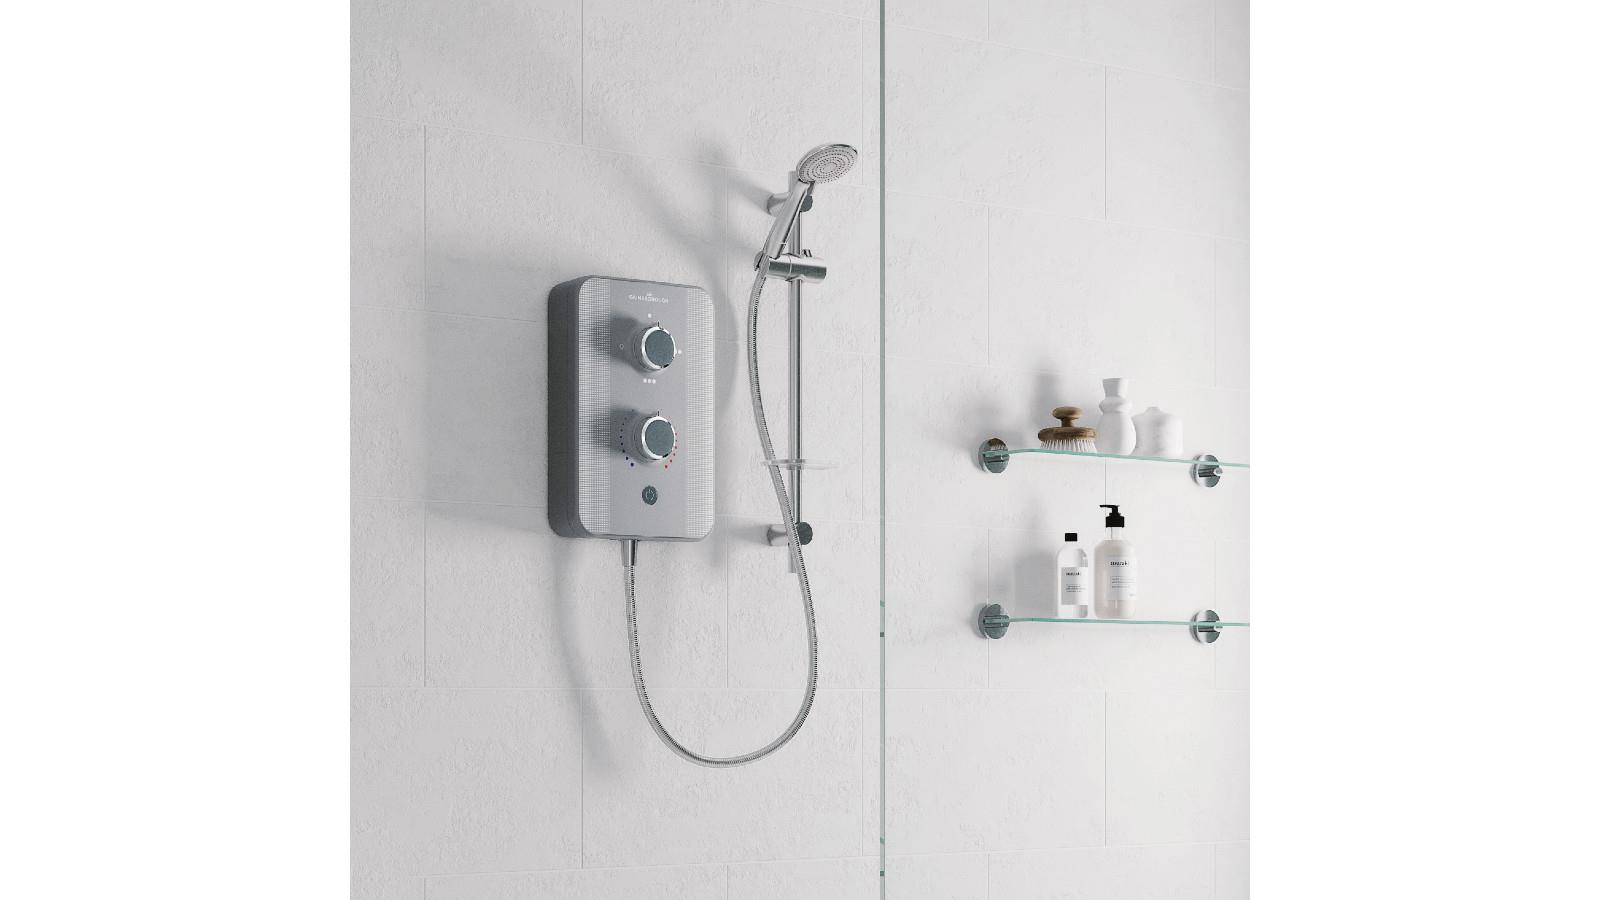 Gainsborough relaunches with new SLIM electric shower range image